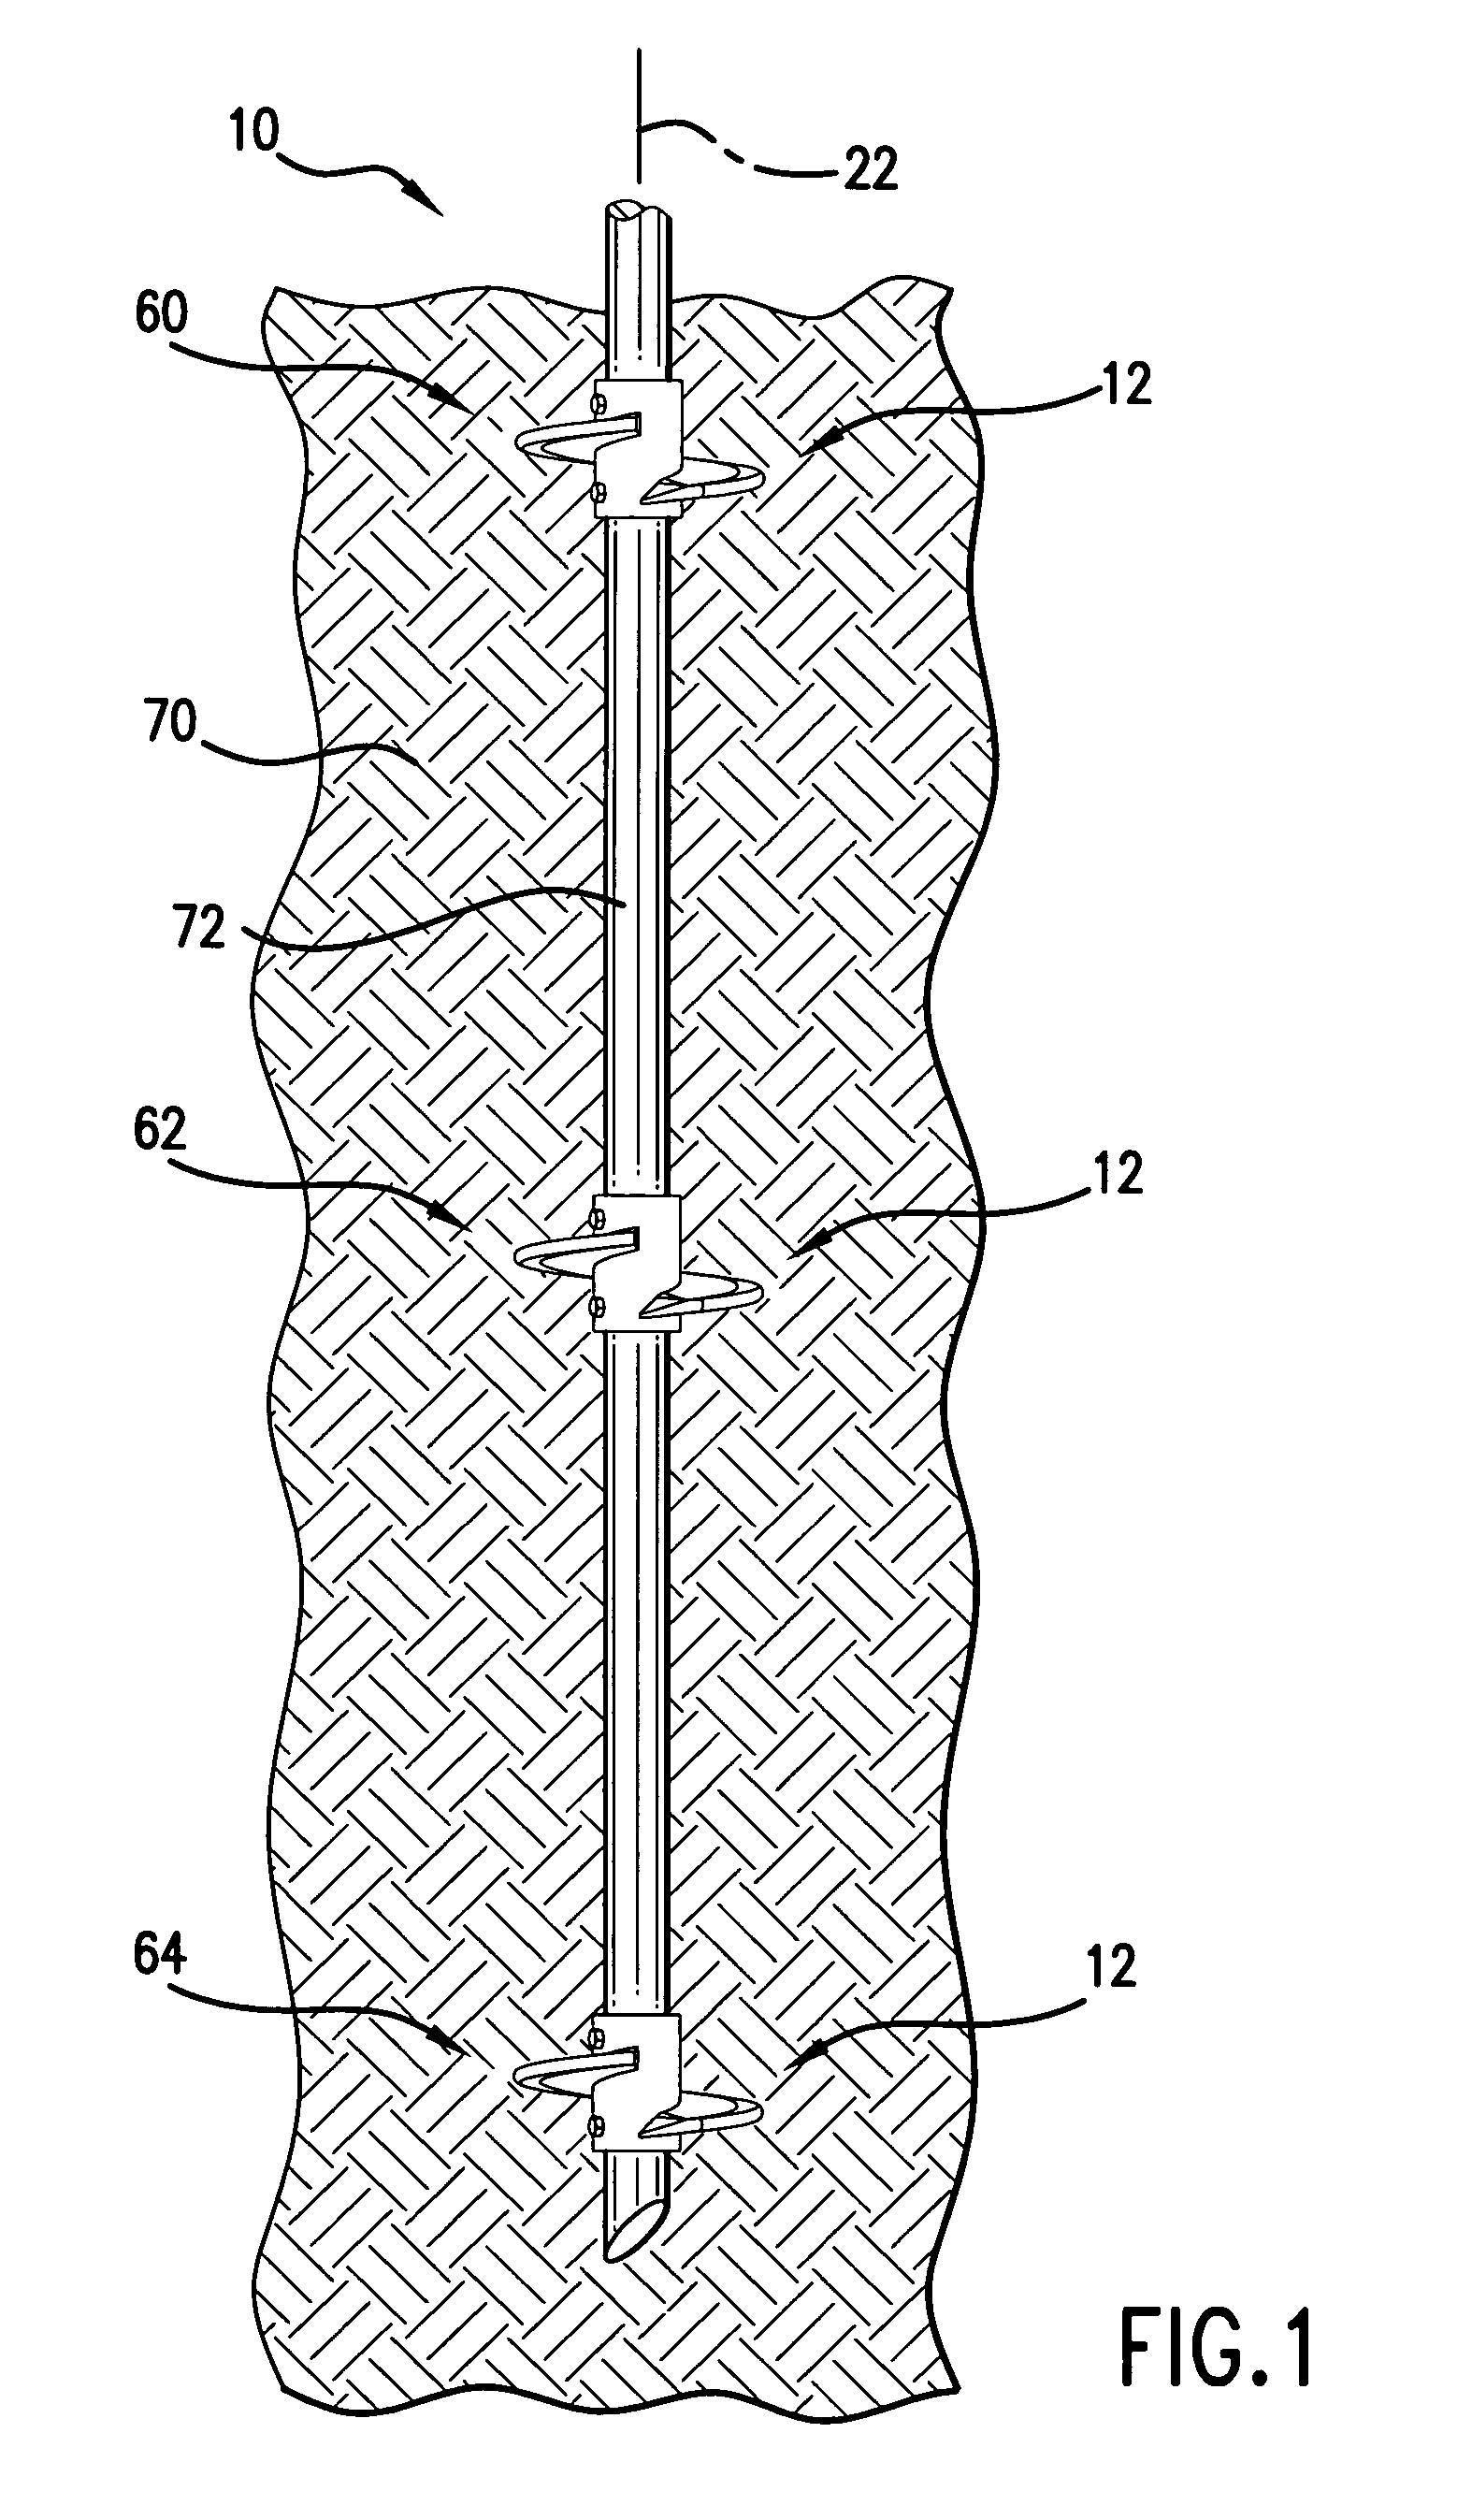 Bearing plate for use in an anchor assembly and related method